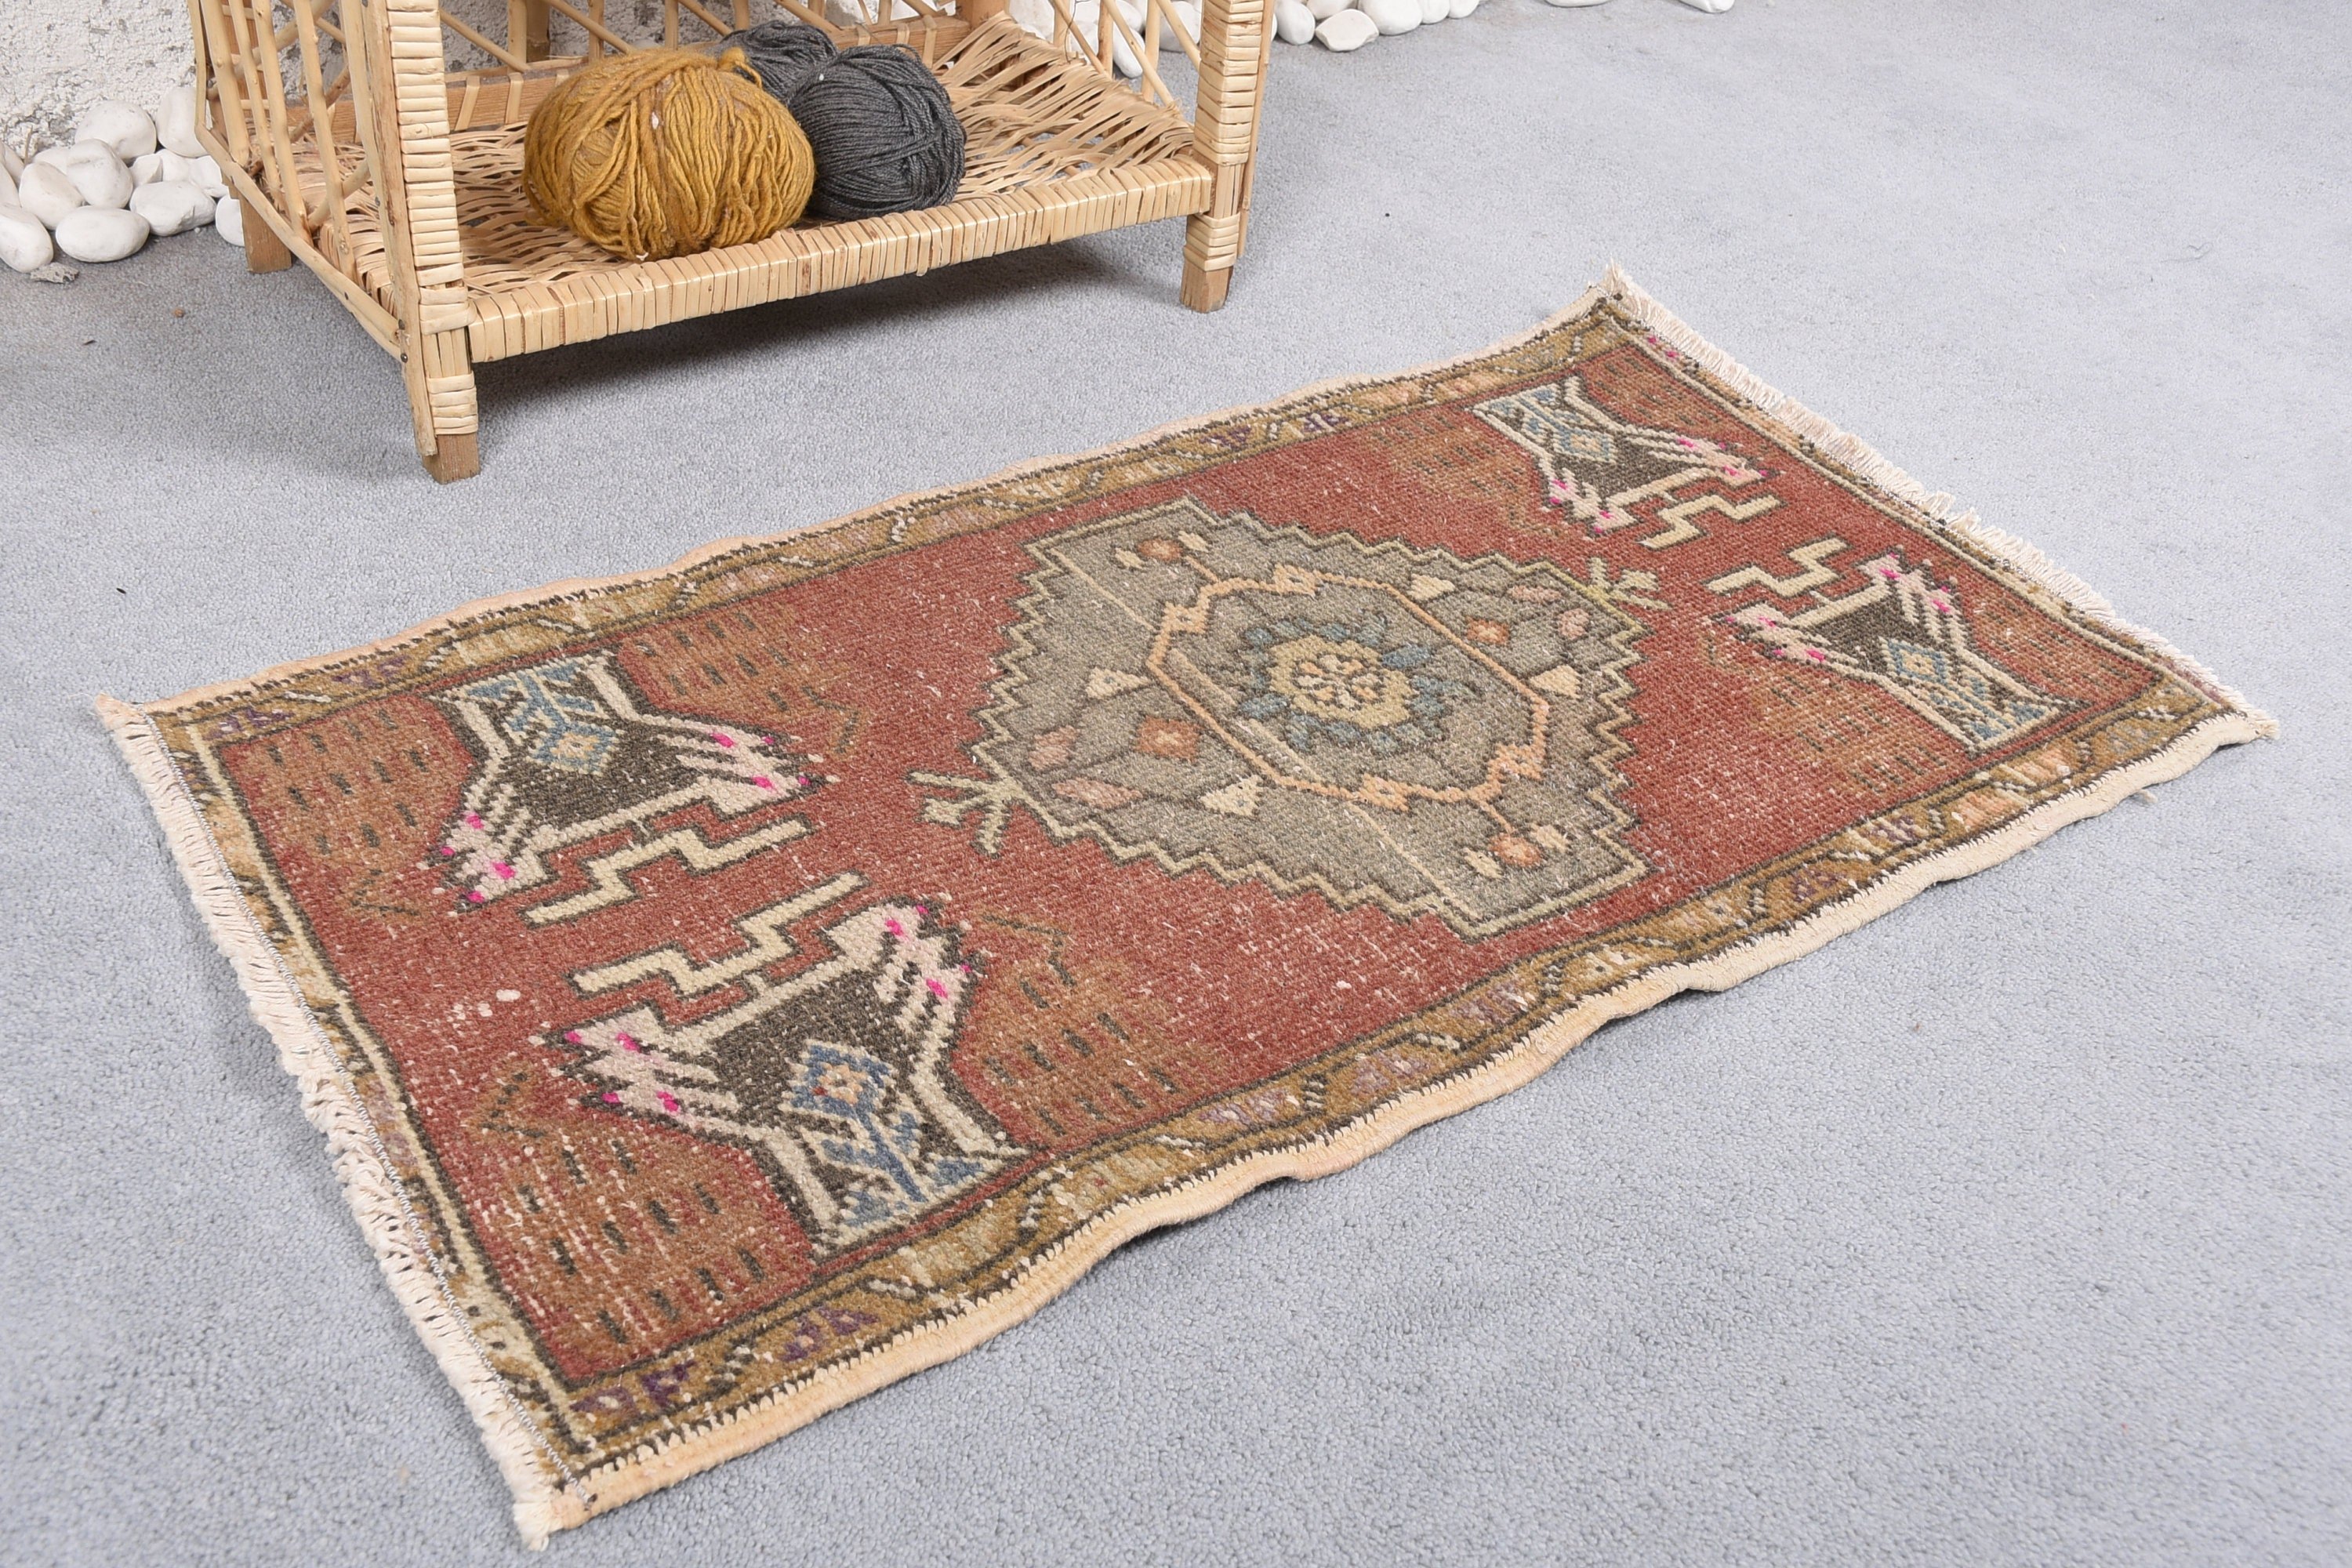 Wall Hanging Rugs, Oriental Rug, Rugs for Kitchen, Red Cool Rugs, Turkish Rug, Vintage Rug, Bedroom Rugs, 1.6x2.9 ft Small Rug, Oushak Rug